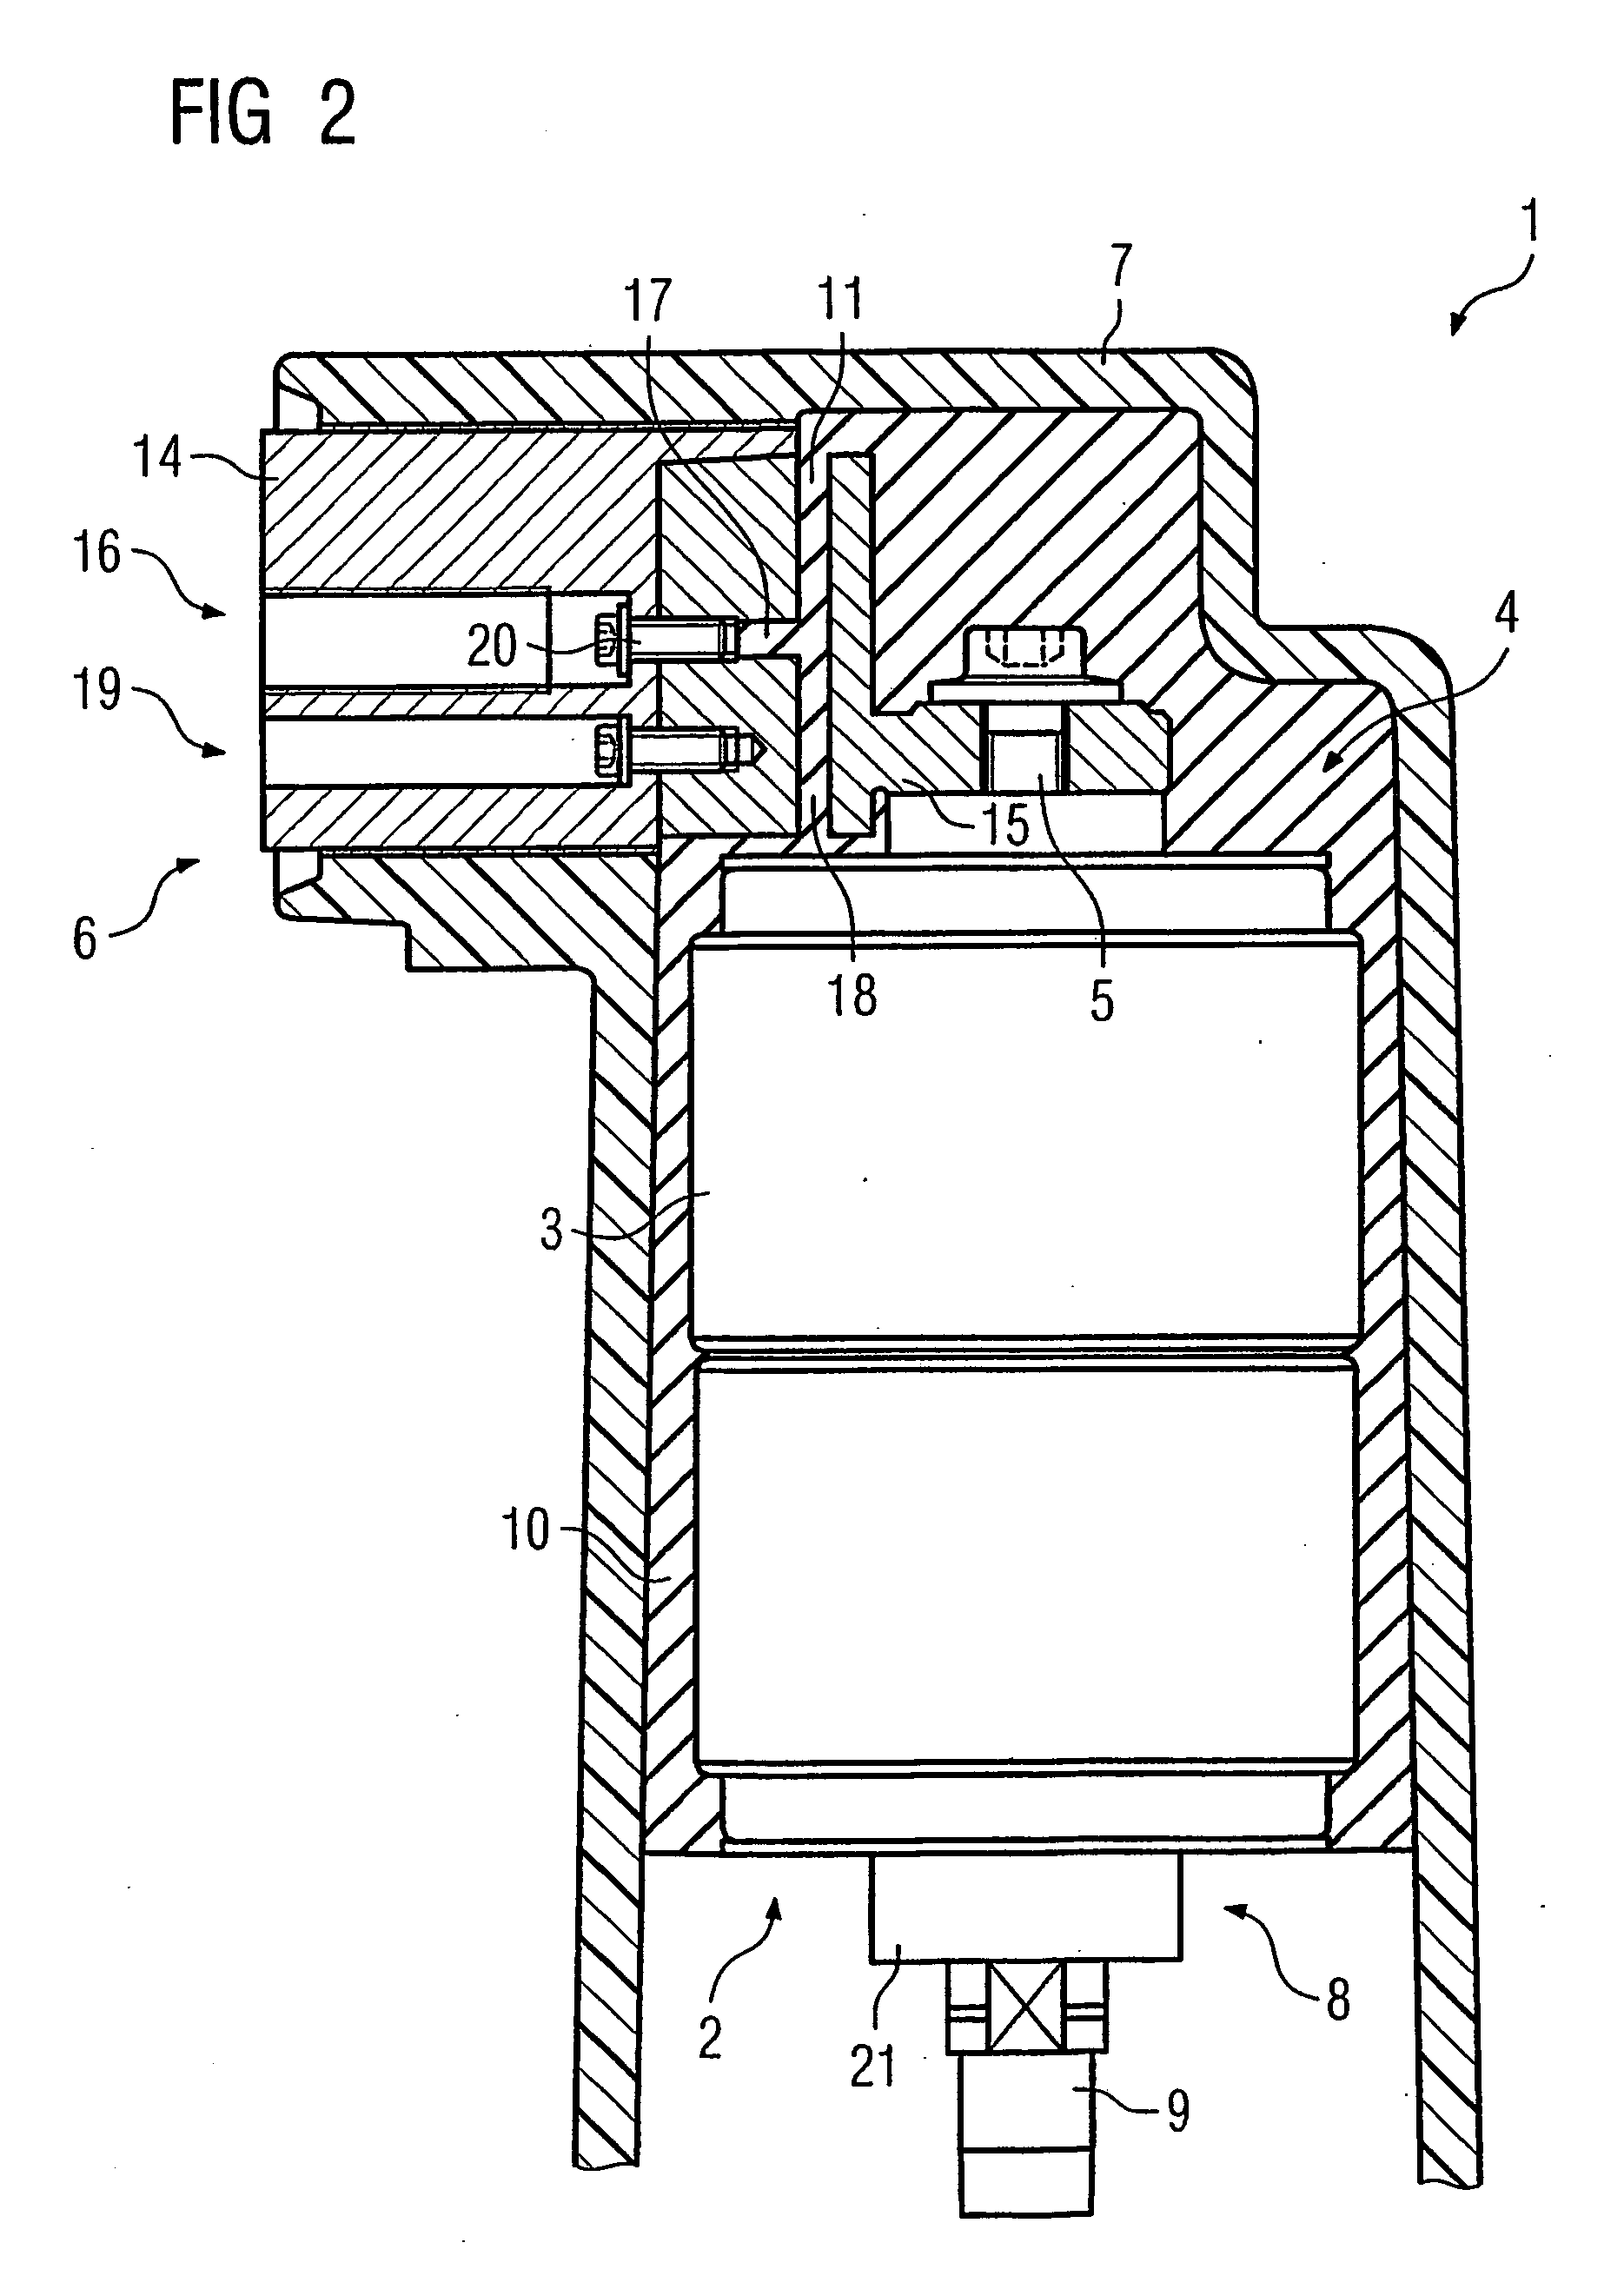 Production of a circuit-breaker pole, insulated by a solid material